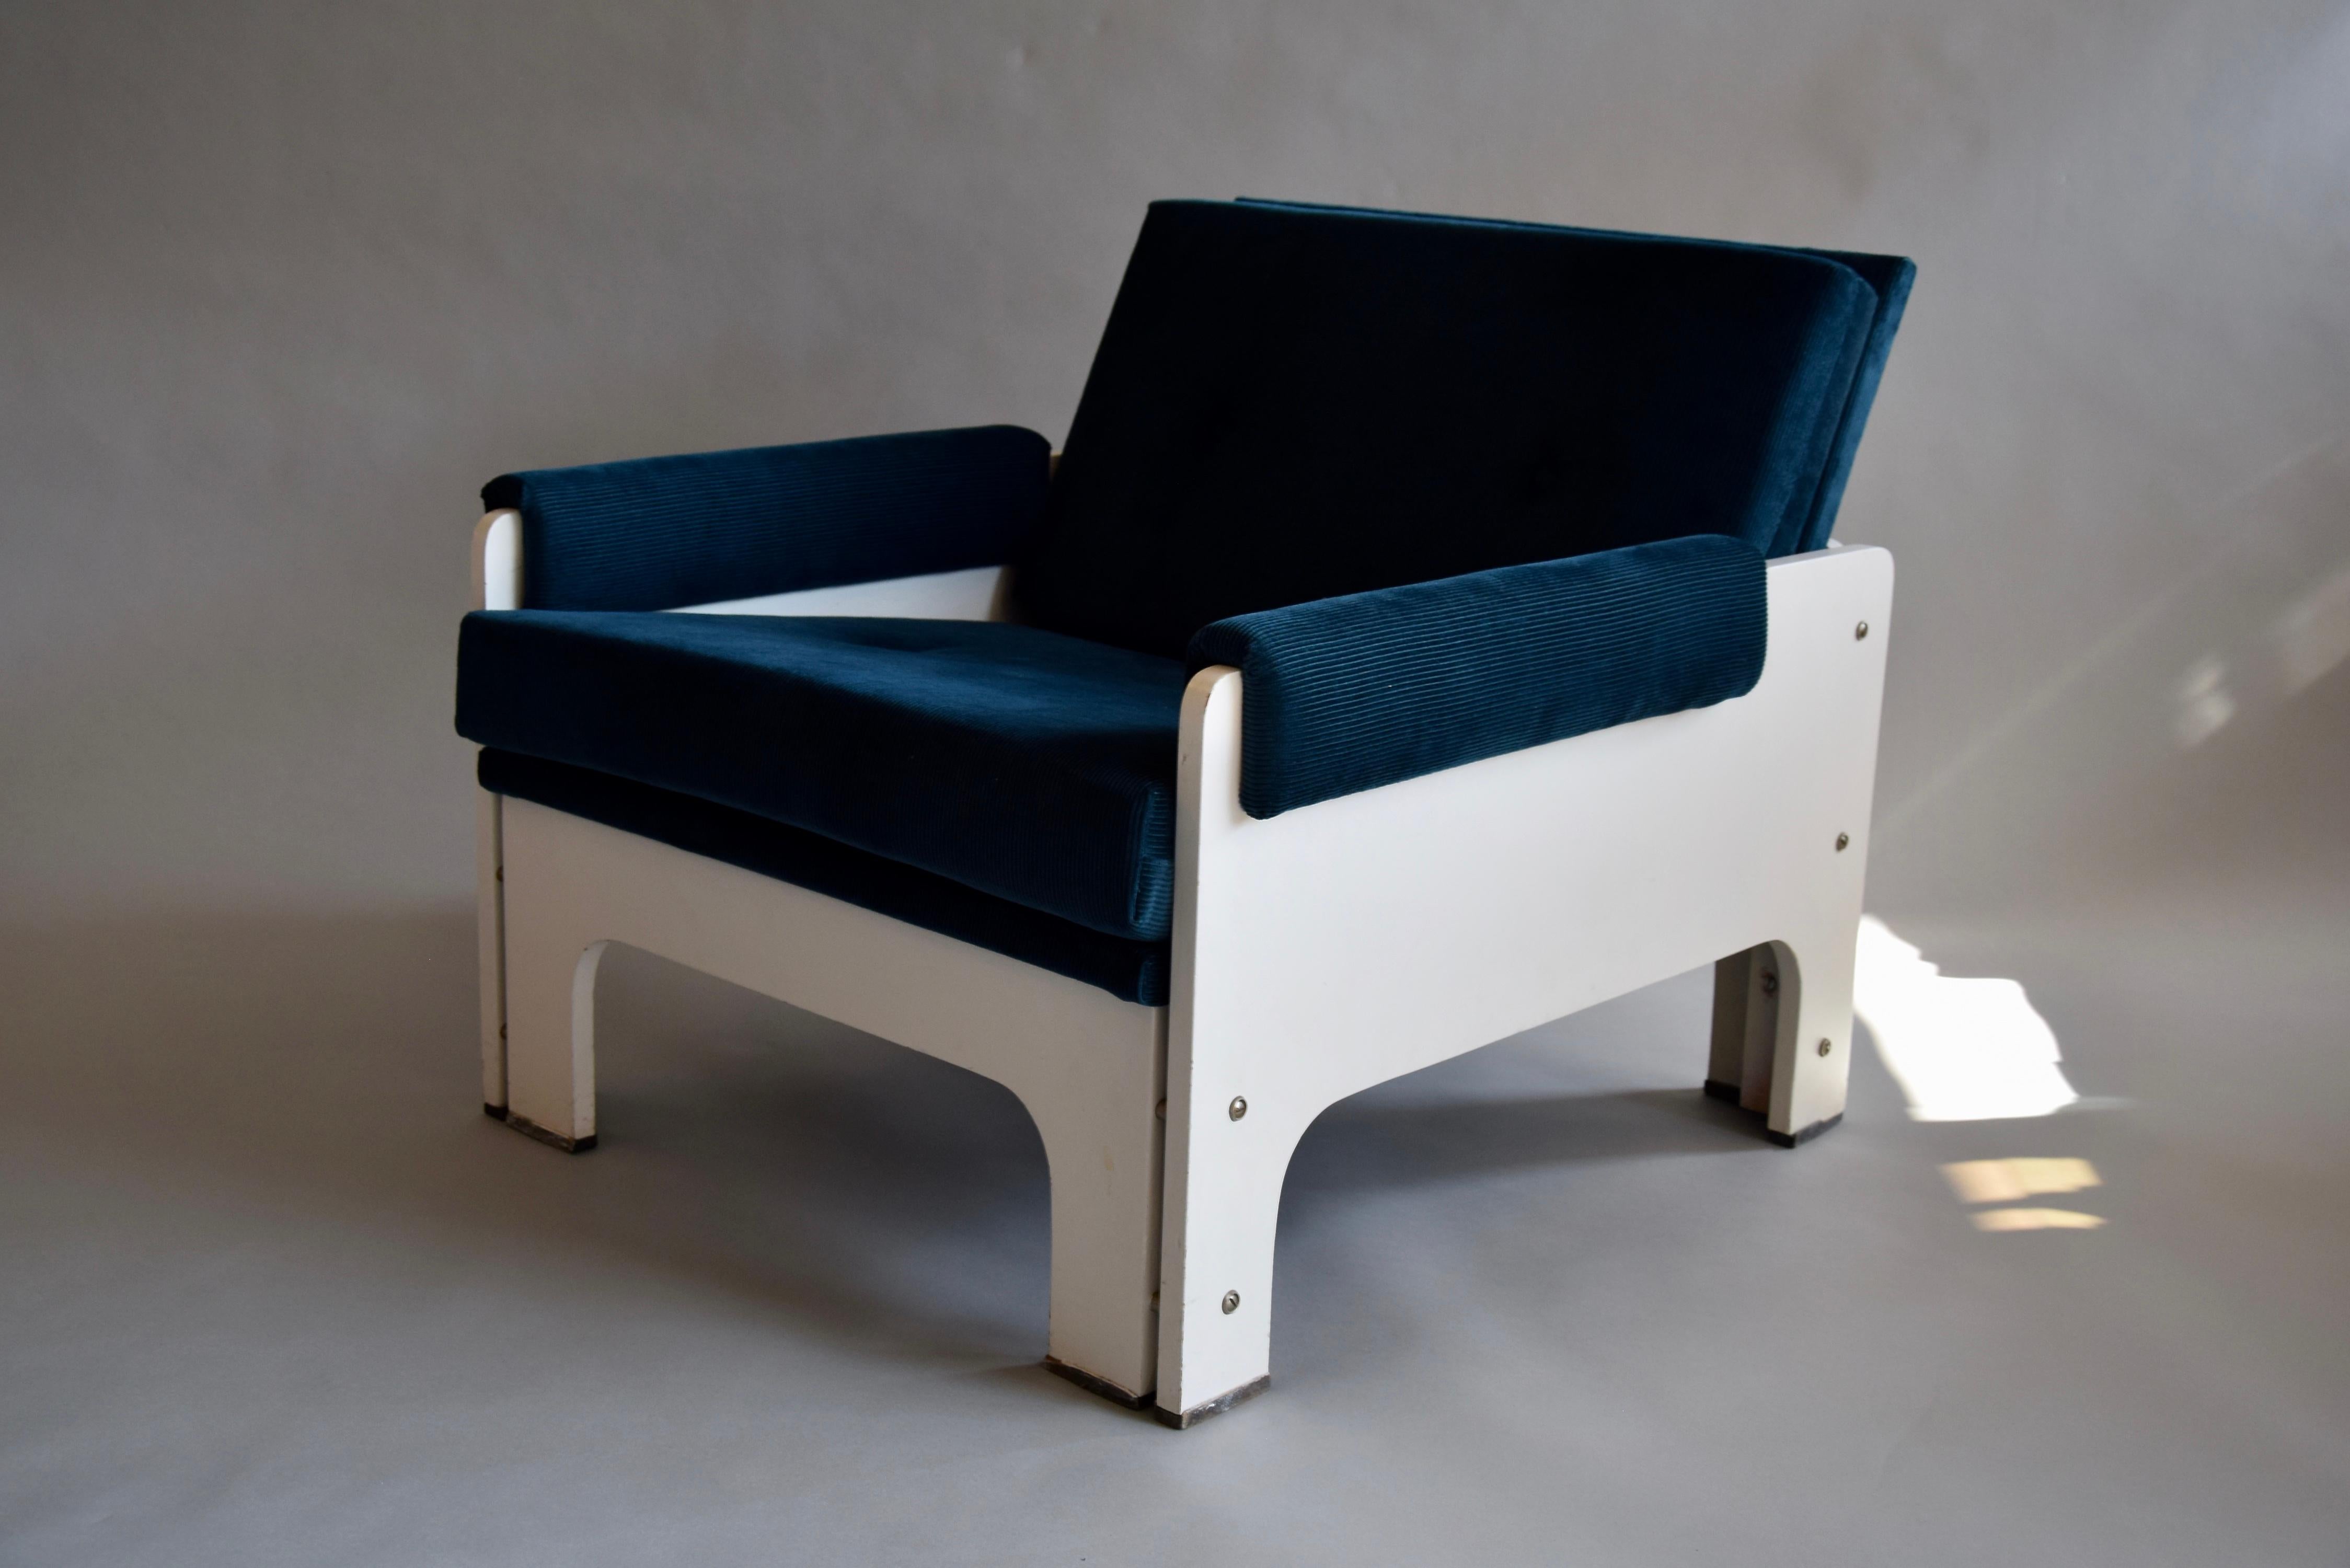 Stylish blue and white reupholstered Mid-Century Modern lounge chair designed by Martin Visser for Spectrum in the Netherlands.
Martin Visser was one of the leading Dutch designers of the mid-century together with Cees Braakman, Gijs Van Der Sluis,